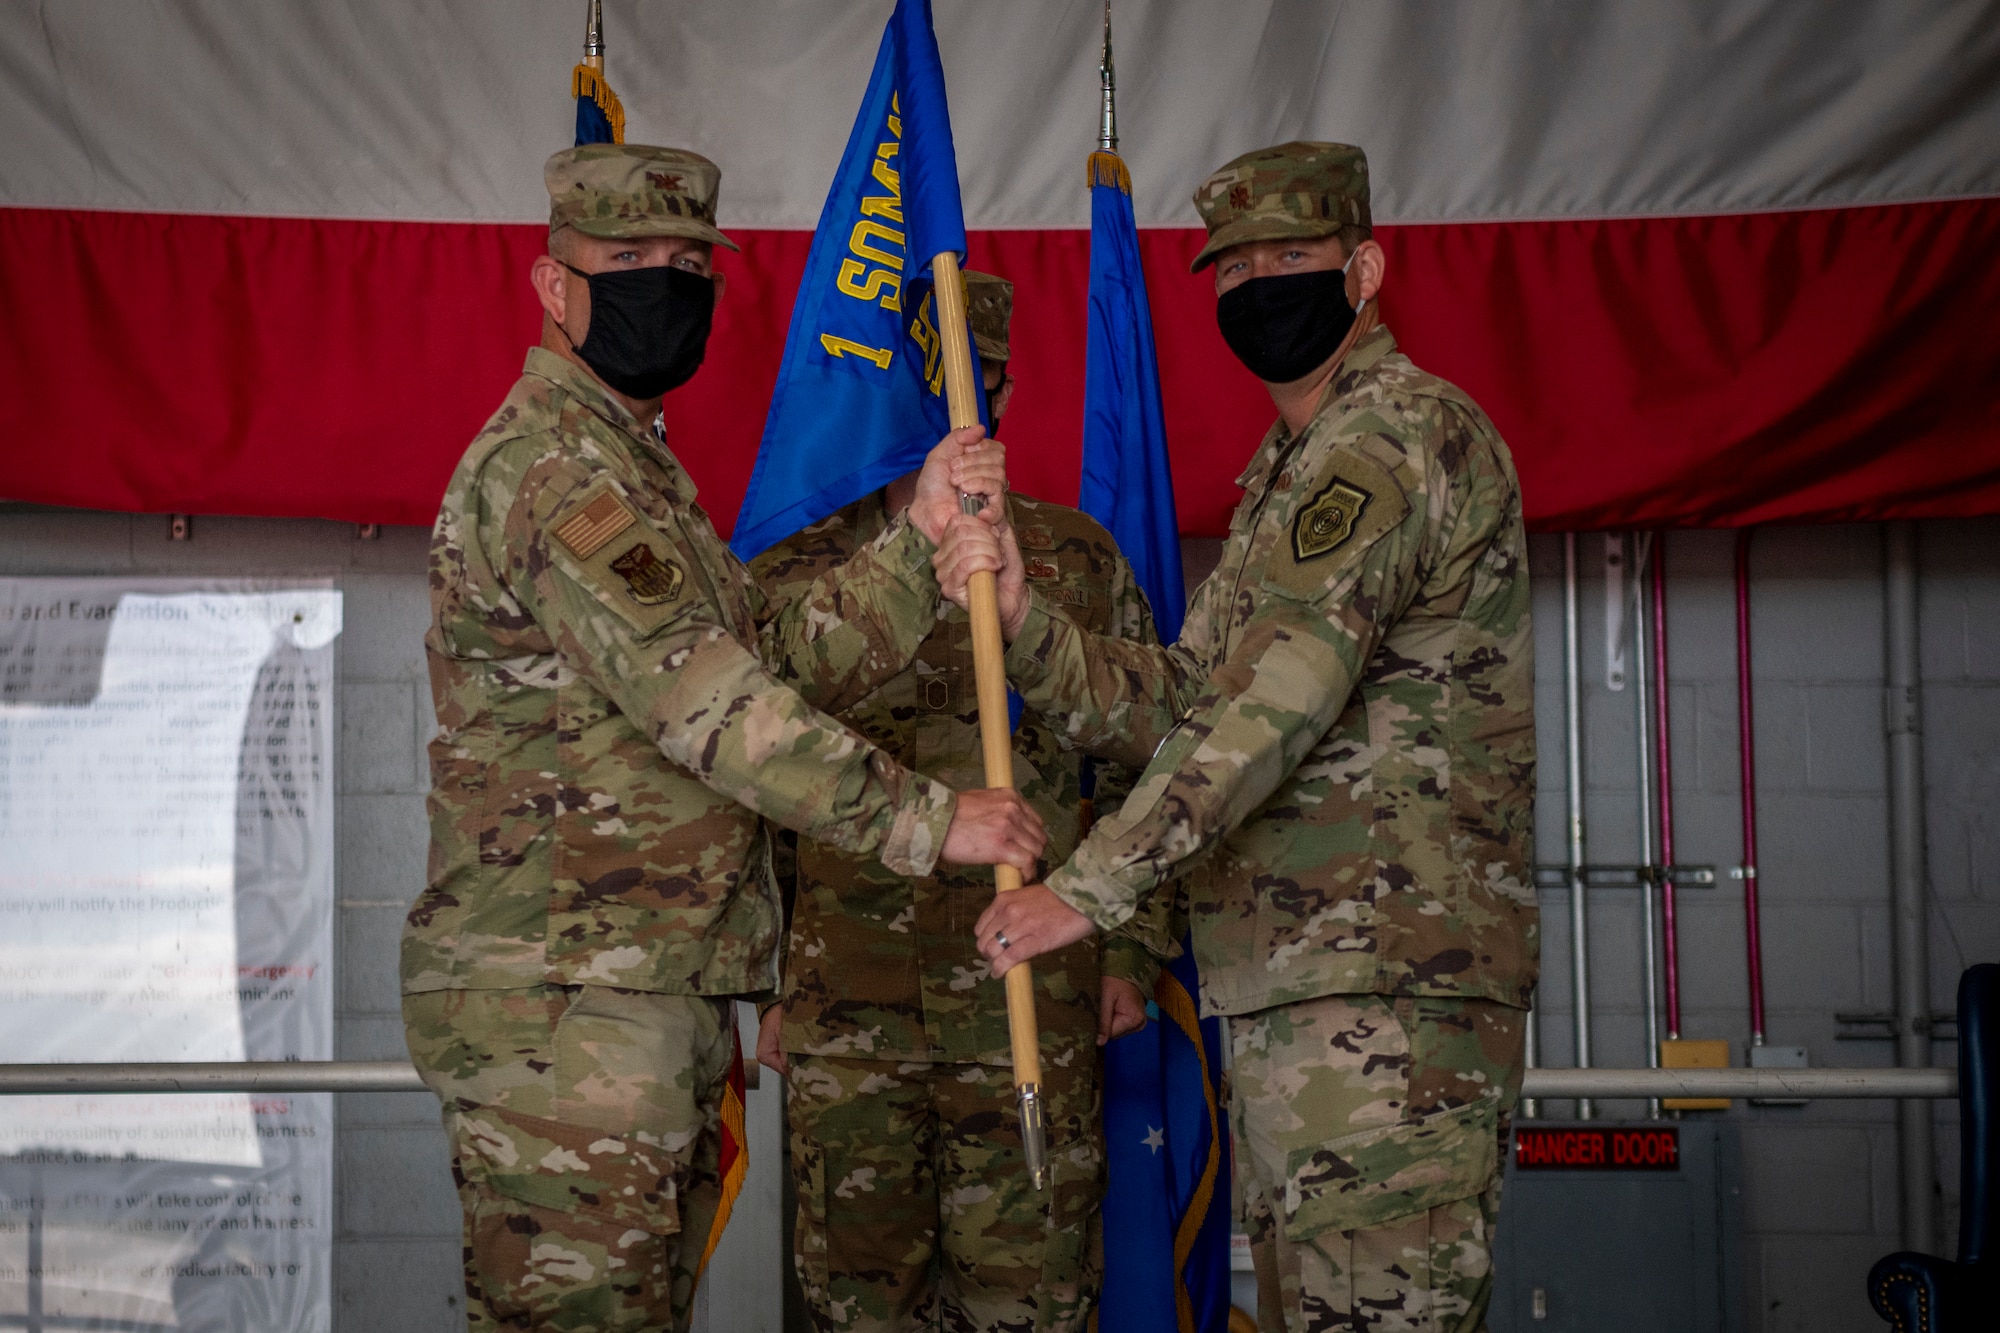 U.S. Air Force Col. Anthony Babcock, commander of the 1st Special Operations Maintenance Group, (left) hands a guidon to U.S. Air Force Maj. Clayton Seiler, incoming commander of the 1st Special Operations Munitions Squadron, during the 1st SOMUNS activation ceremony at Hurlburt Field, Florida, July 8, 2020.